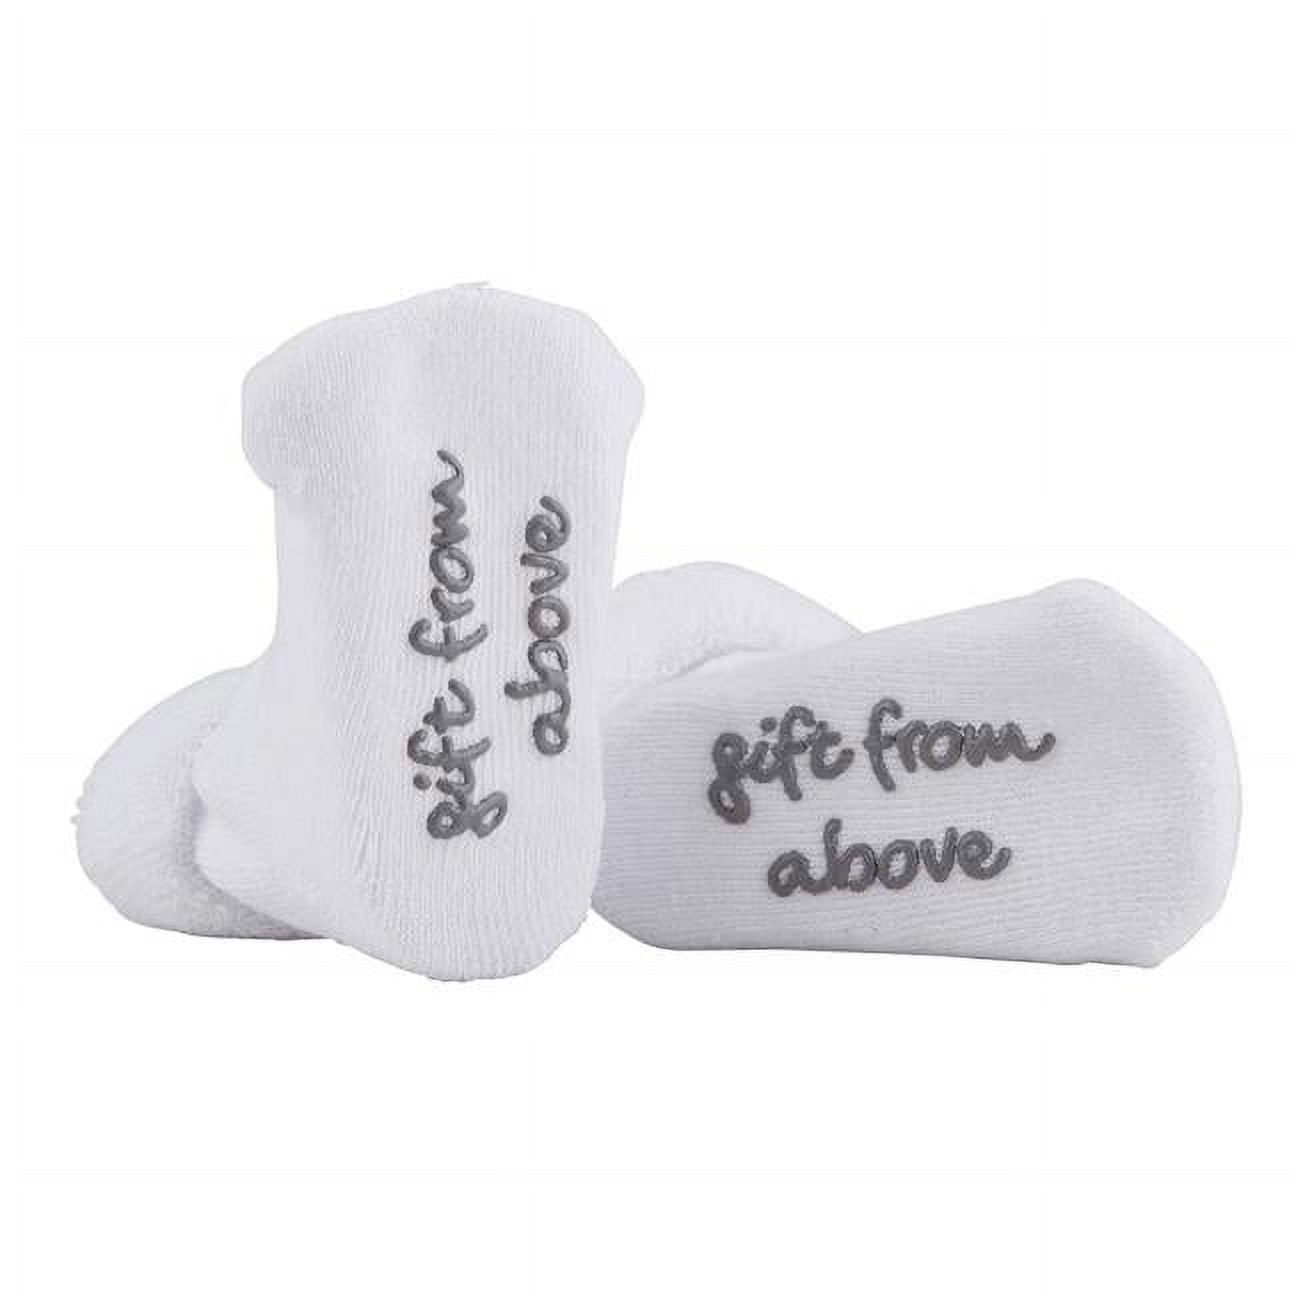 139354 3-12 Months Gift From Above Inspirational Baby Socks